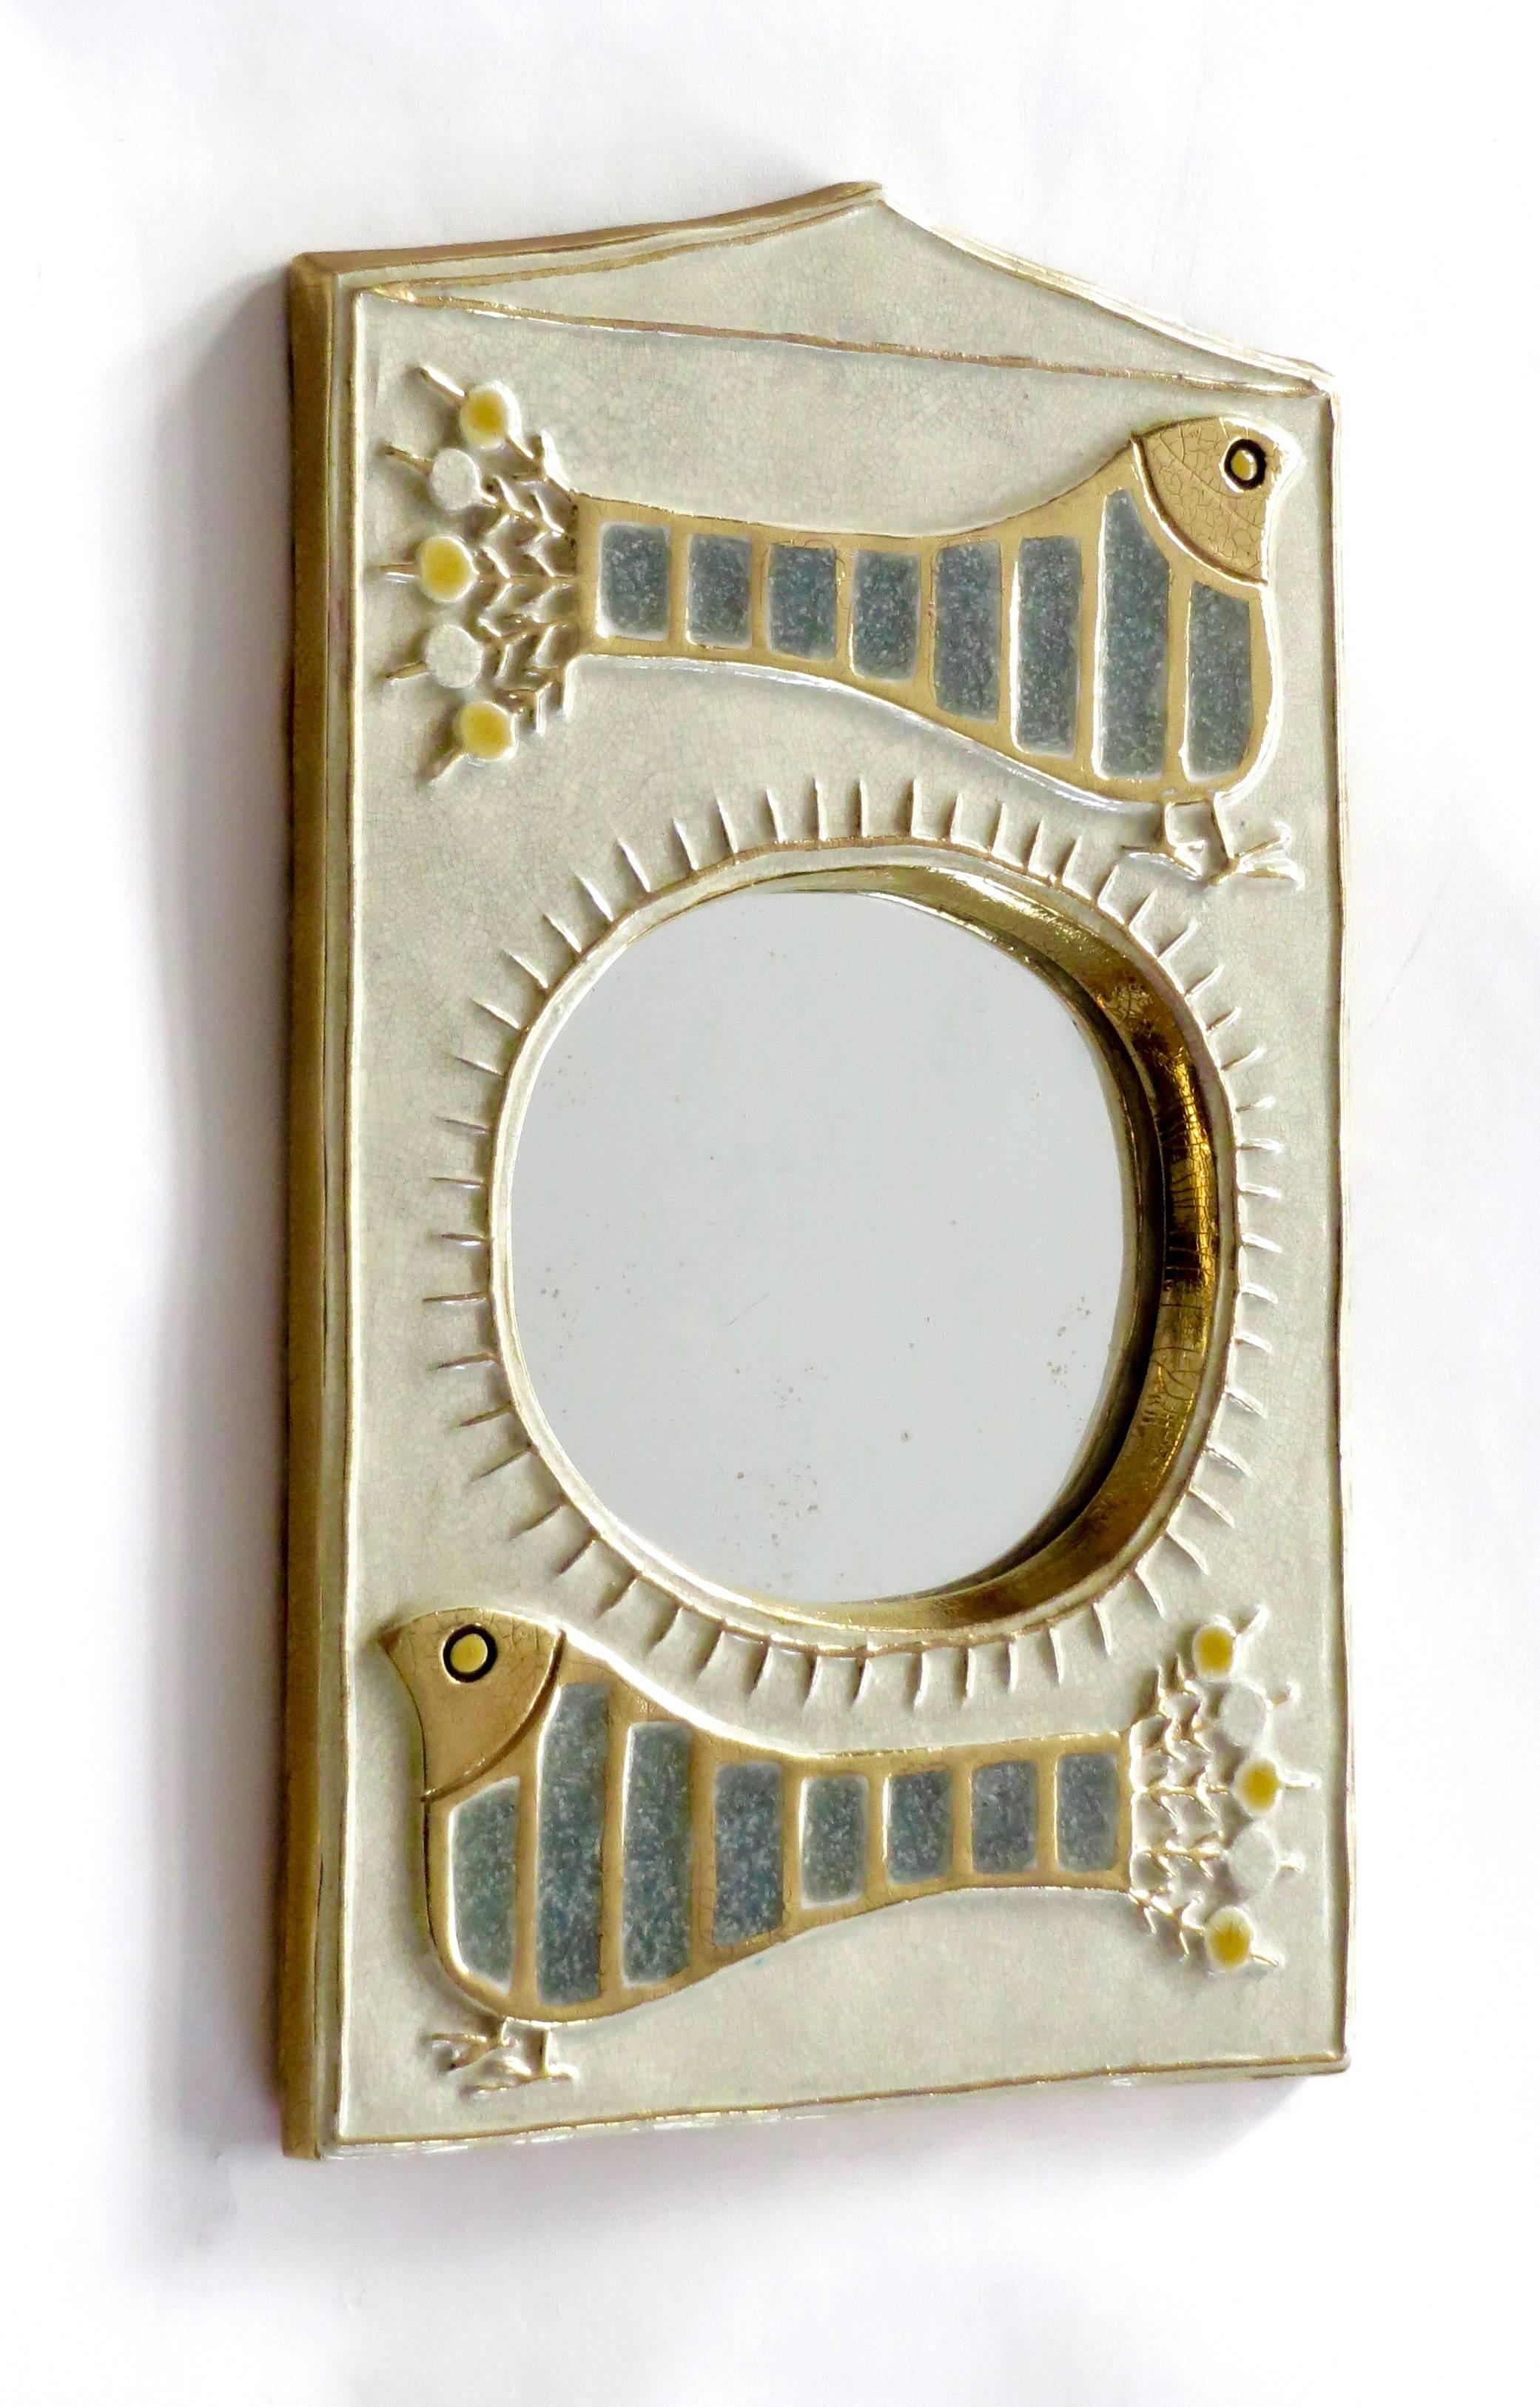 A French ceramic mirror by Francois Lembo with stylized bird motif and sun motif.
Very pale blue and green colors with iconic gold Limbo glaze on a creamy white glazed background.
Back in typical felt of Lembo.
Excellent condition with no chips or